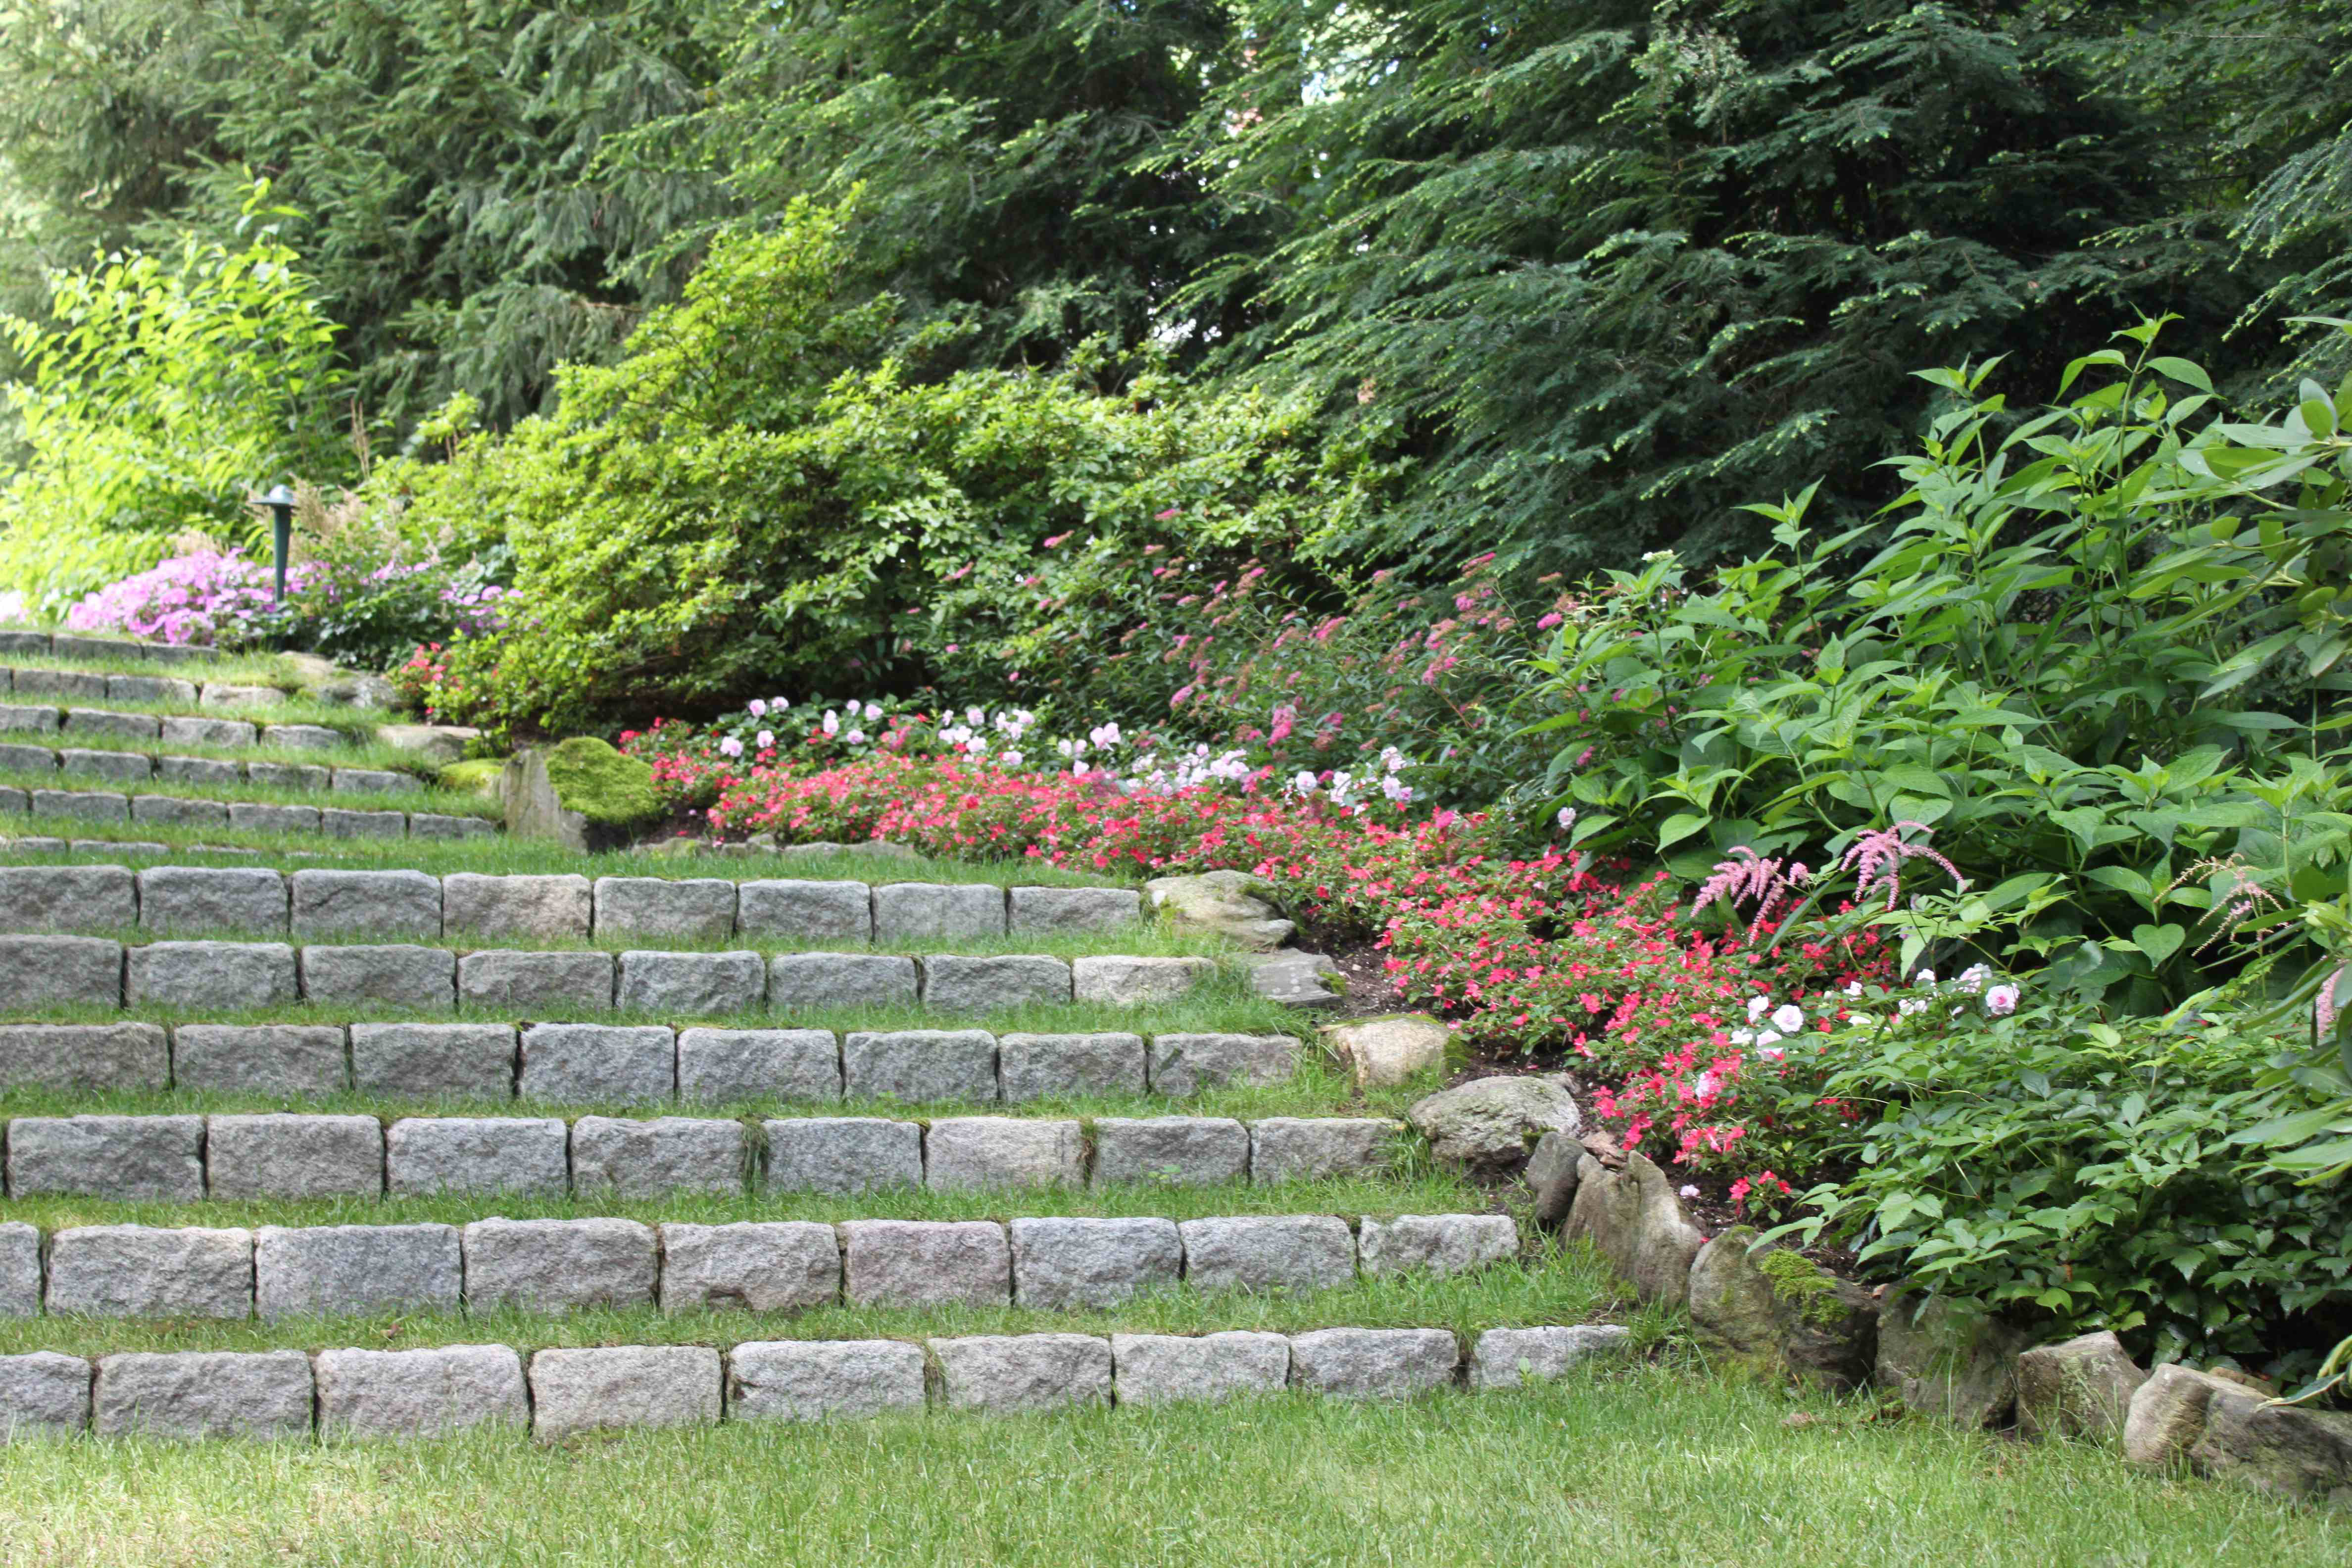 How to avoid some common landscape design mistakes
